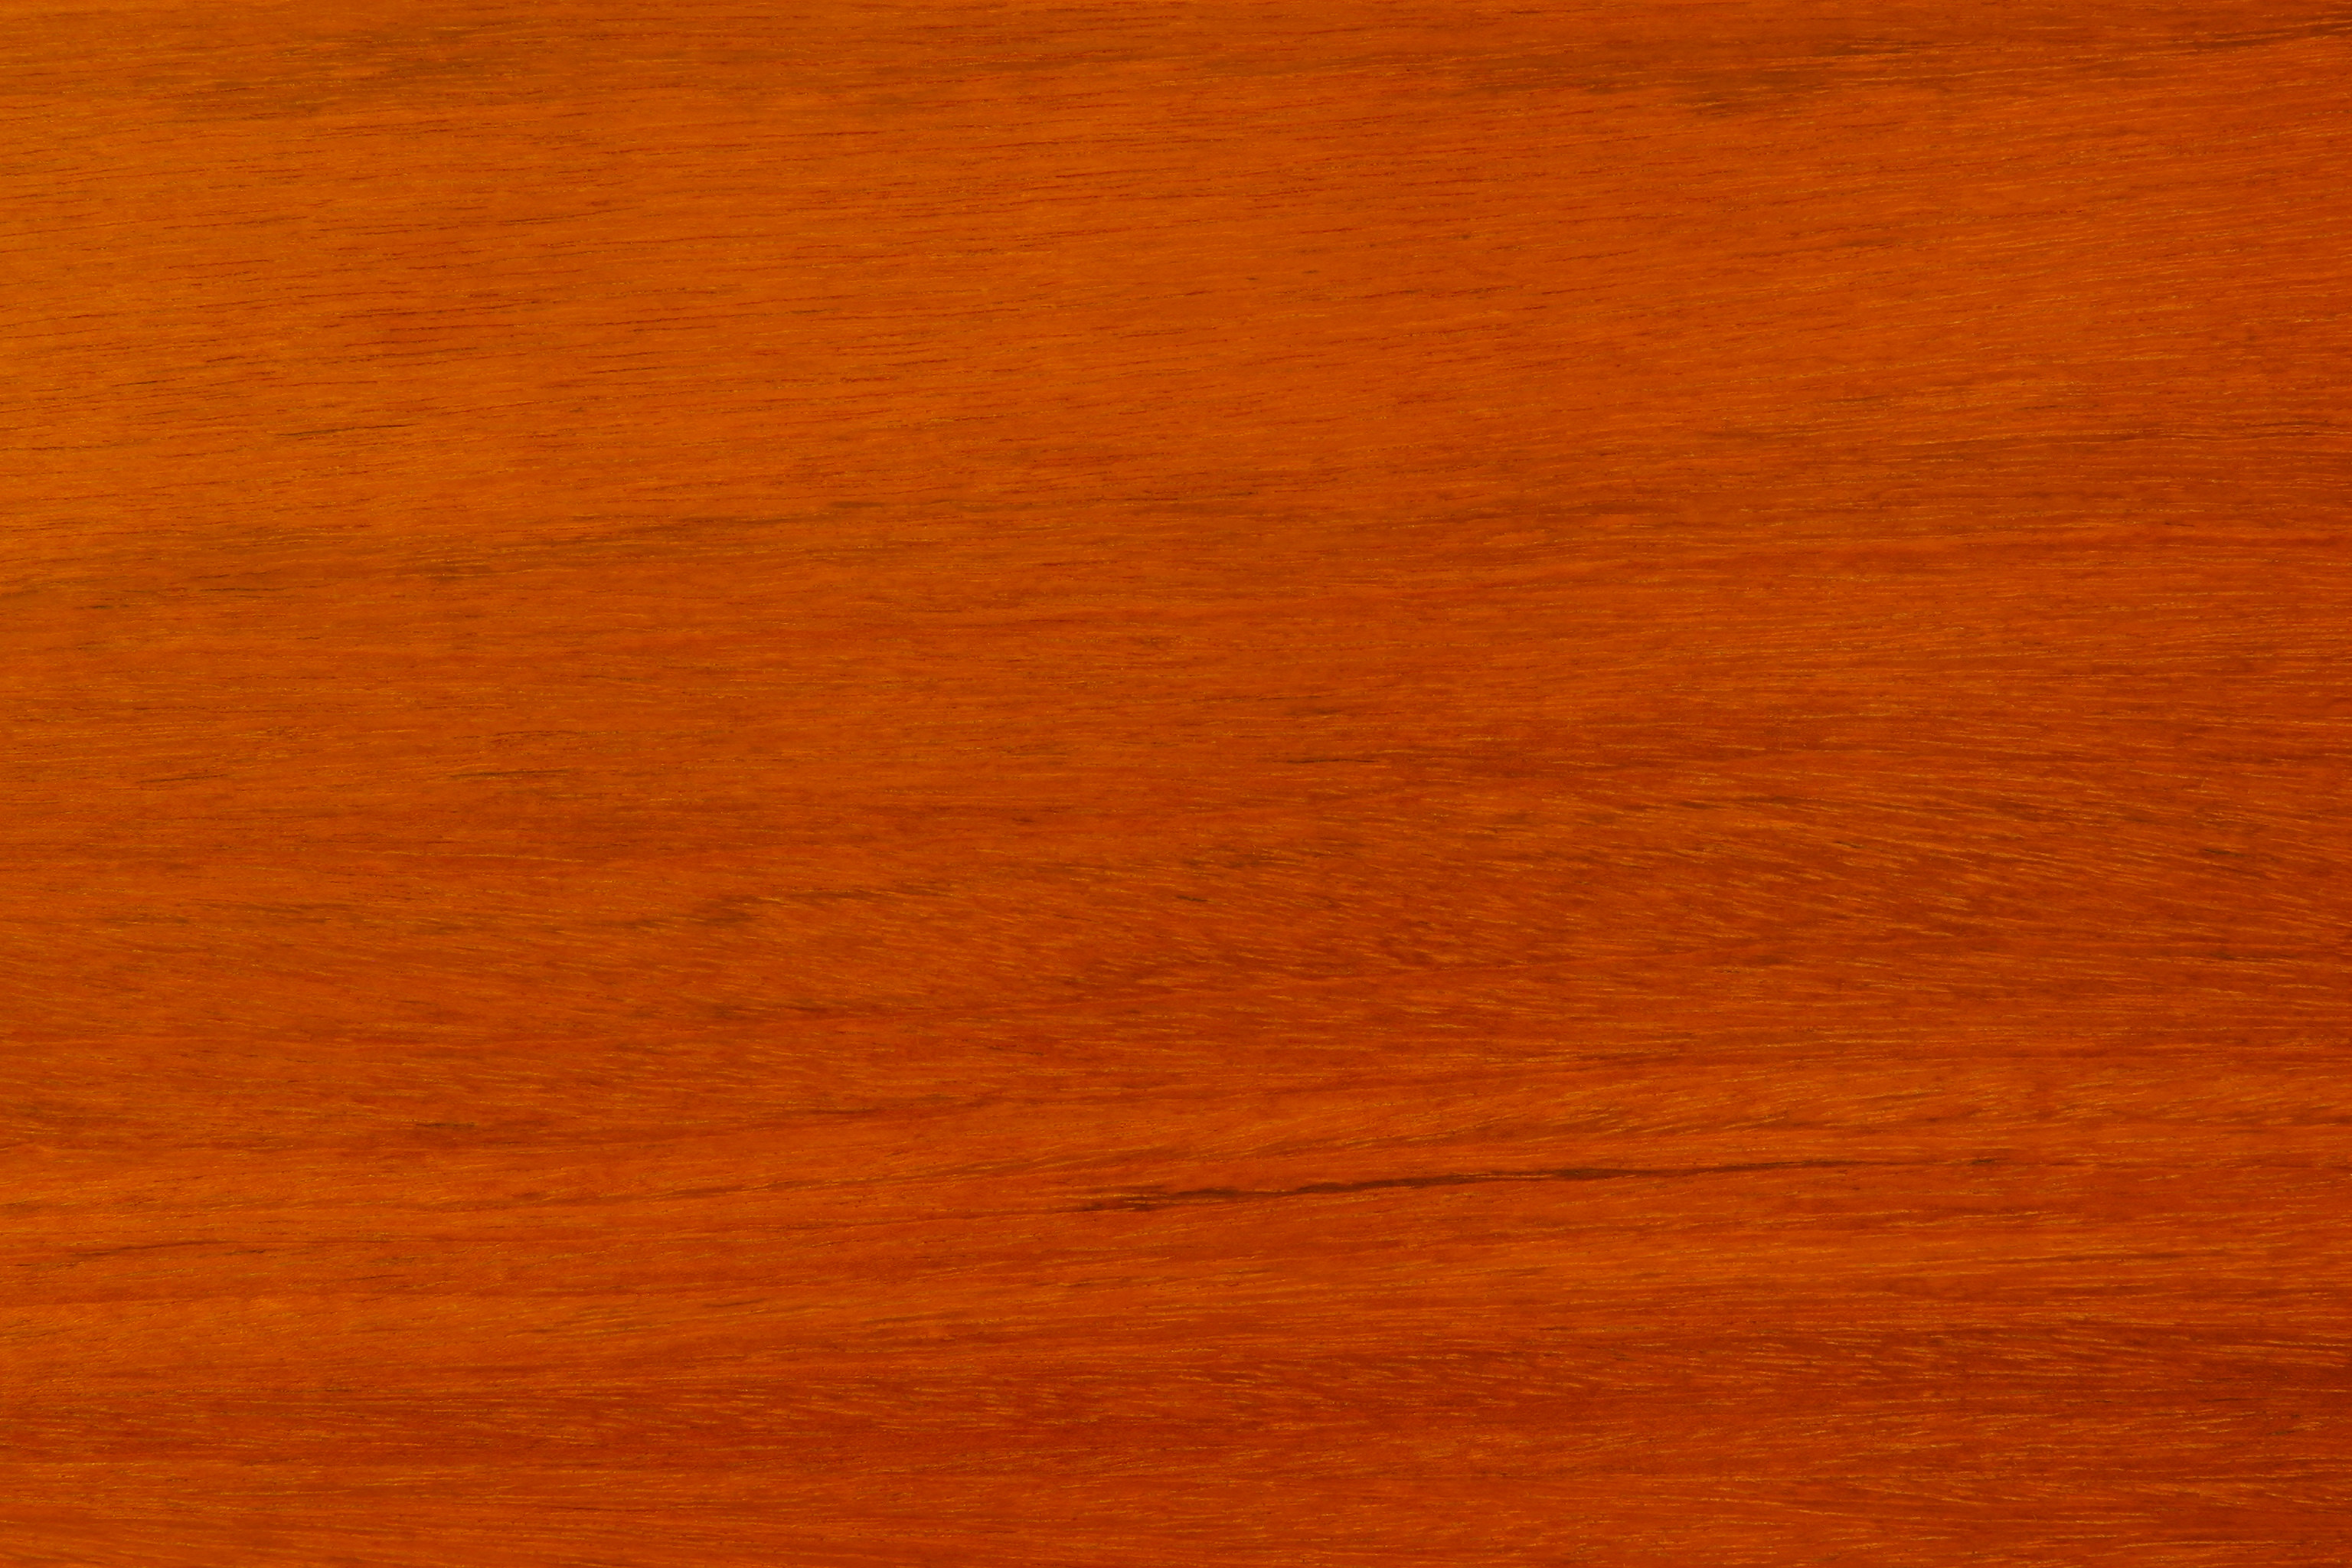 texture wood, download image, photo, tree wood, wood texture, background